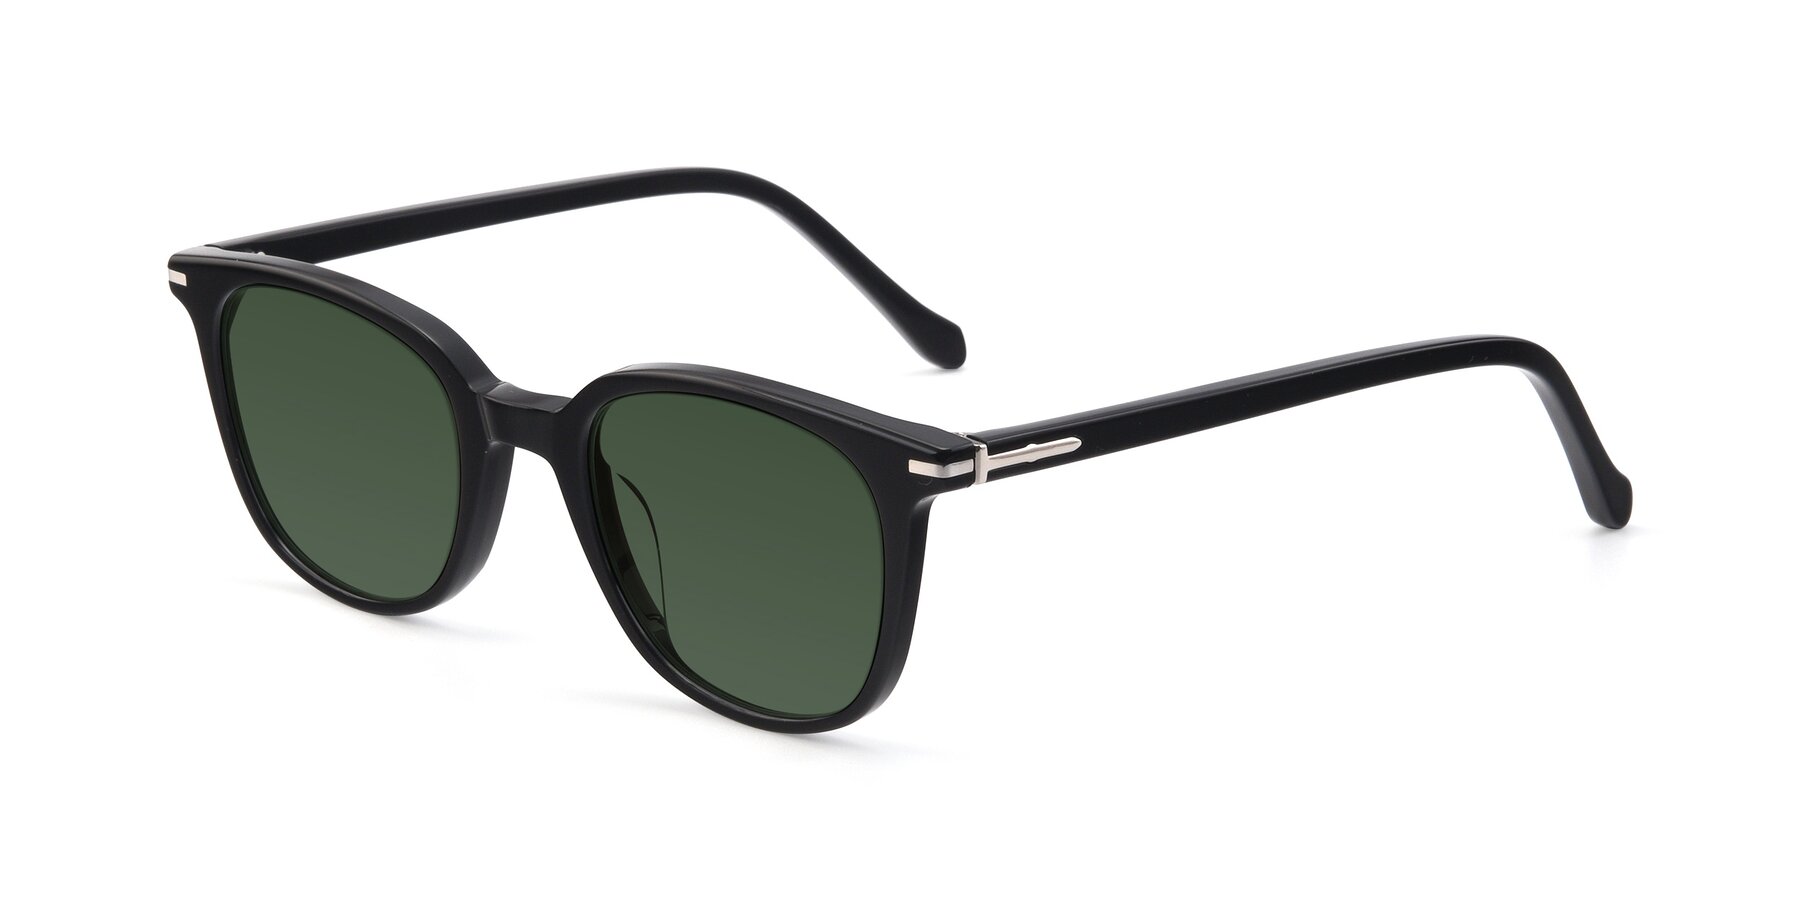 Angle of 17562 in Black with Green Tinted Lenses